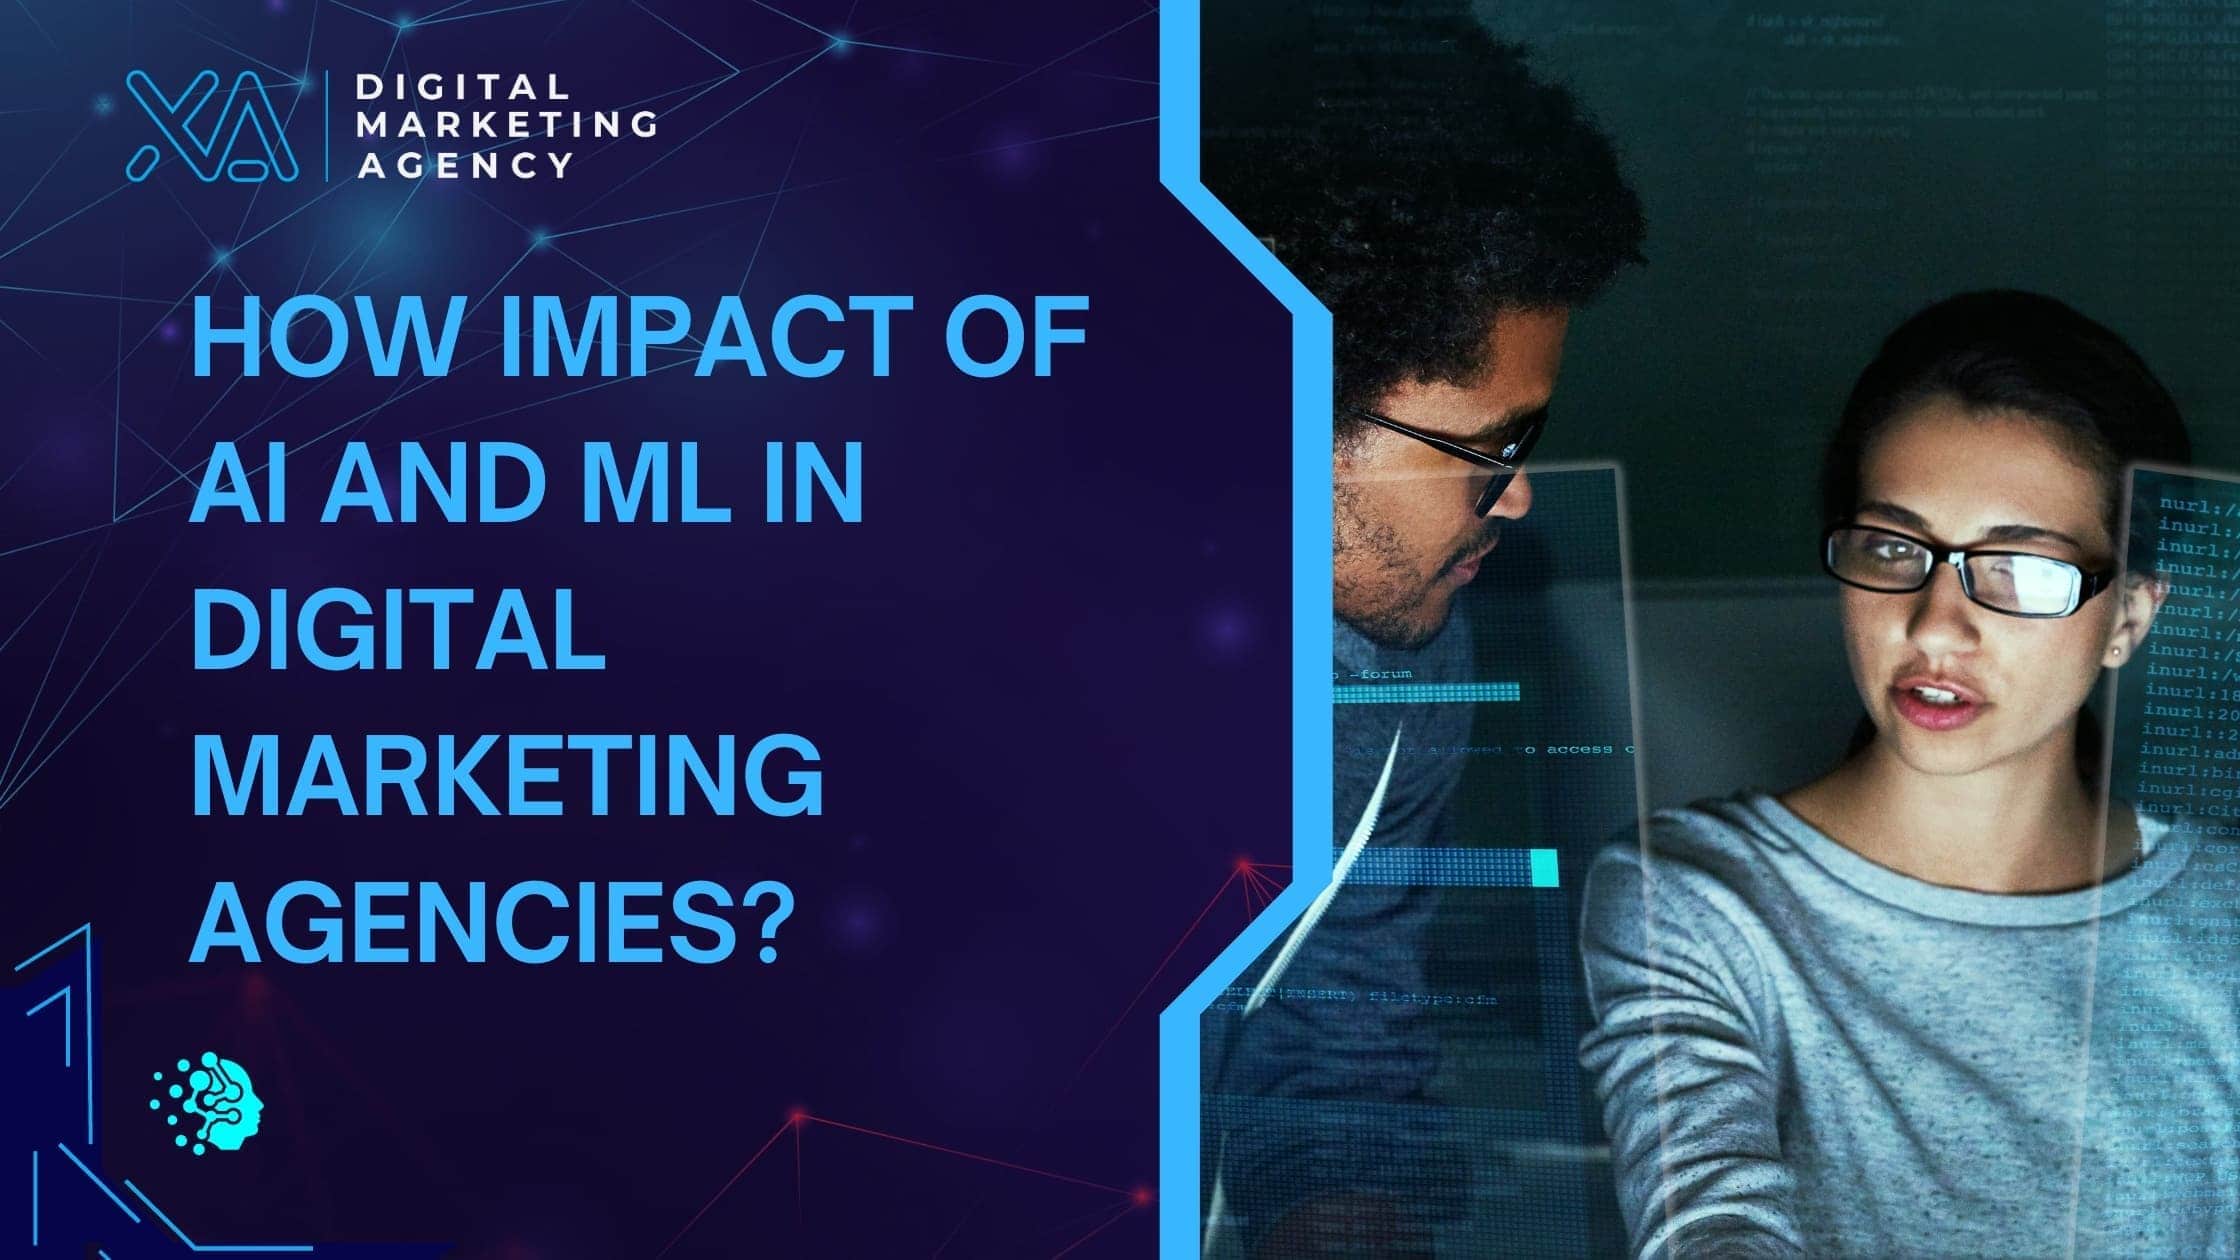 How Impact of AI and ML in Digital Marketing Agencies?